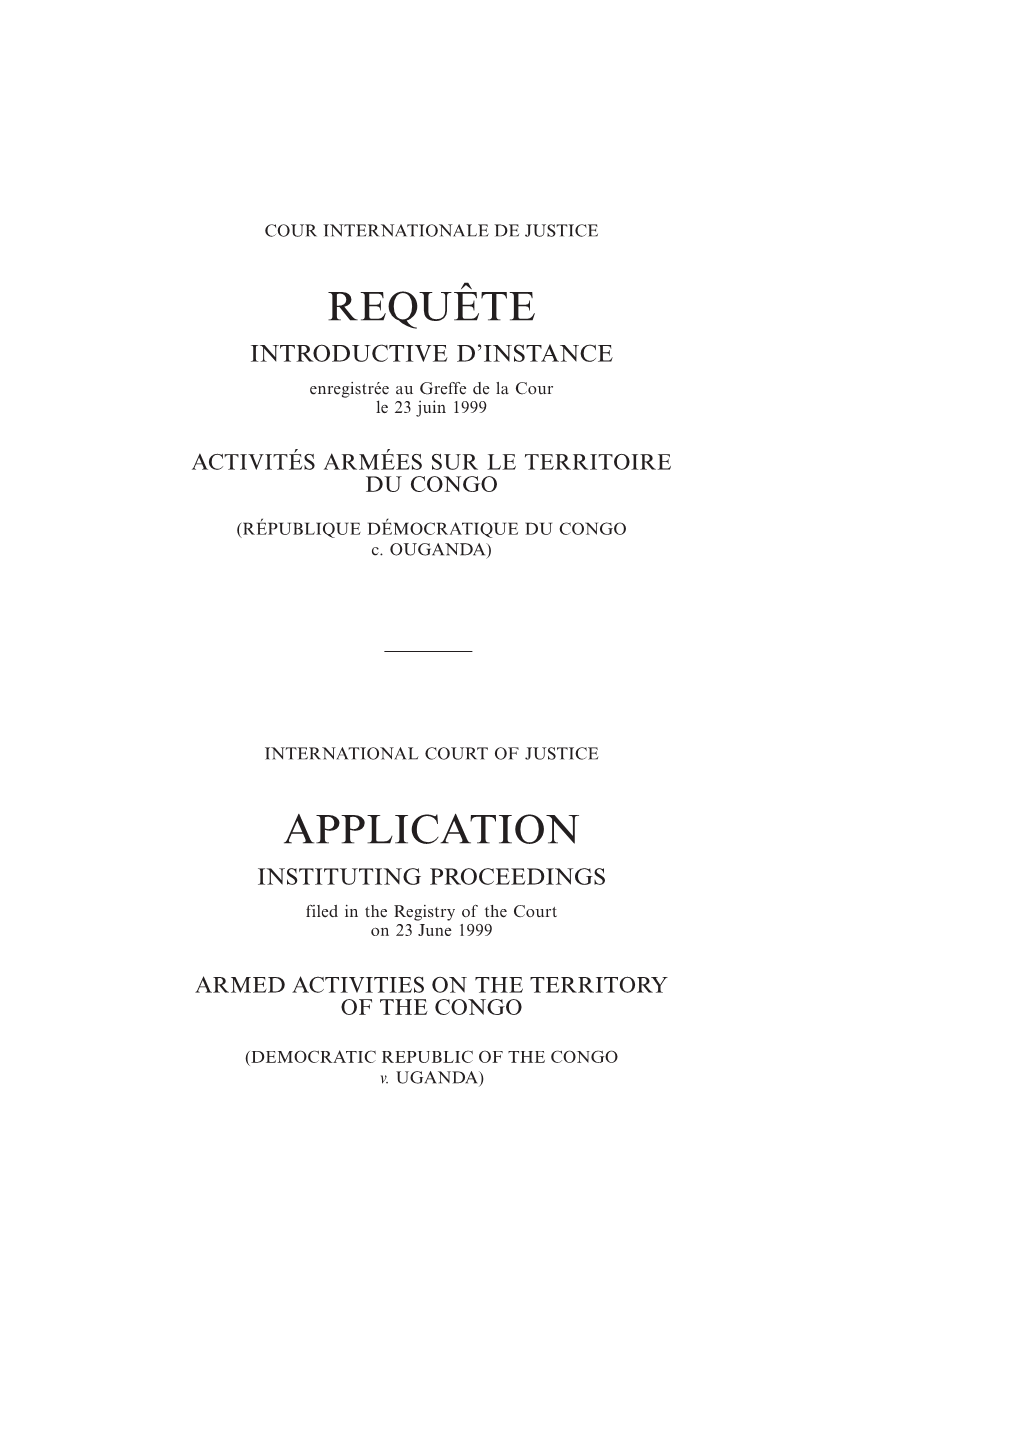 APPLICATION INSTITUTING PROCEEDINGS Filed in the Registry of the Court on 23 June 1999